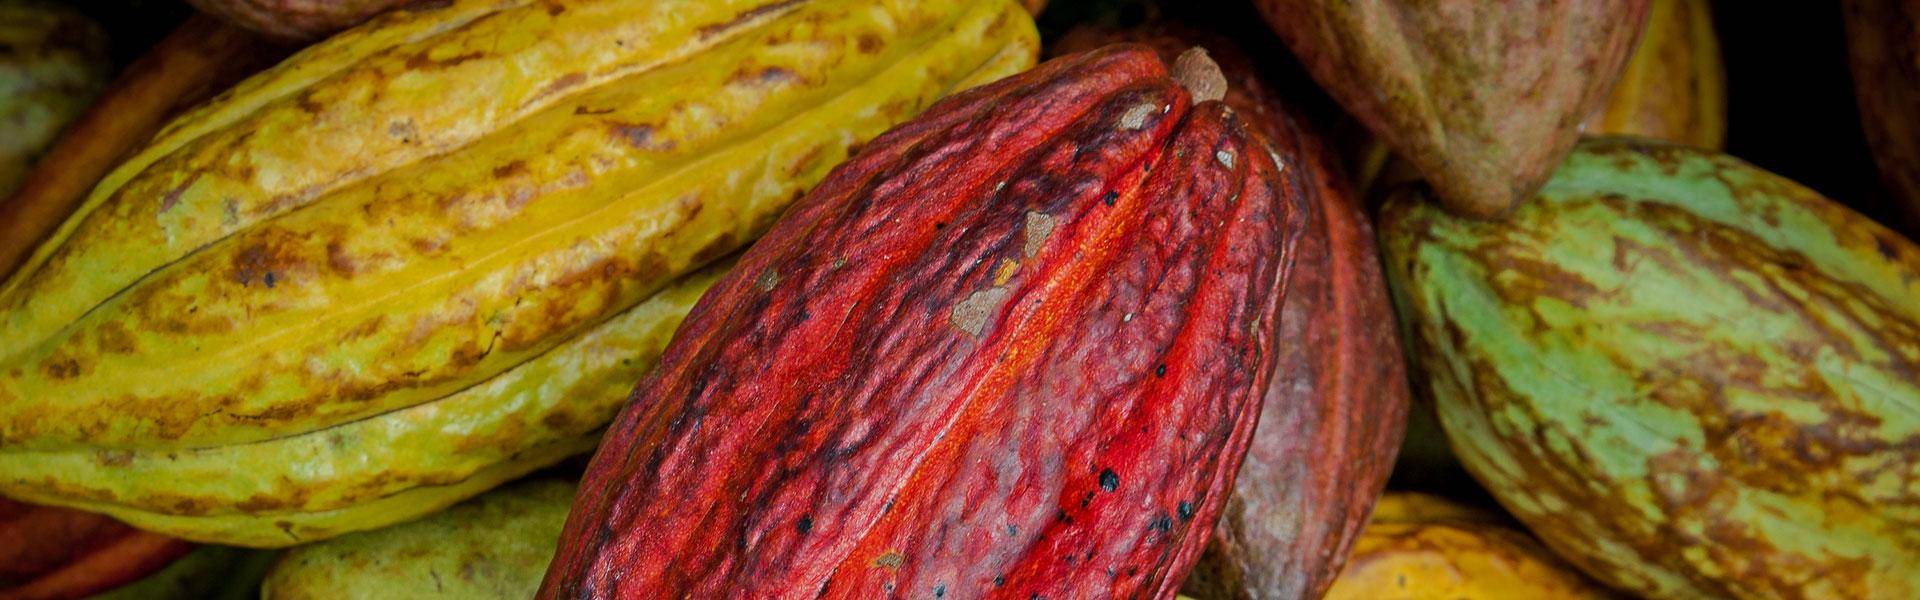 yellow red cocoa pods